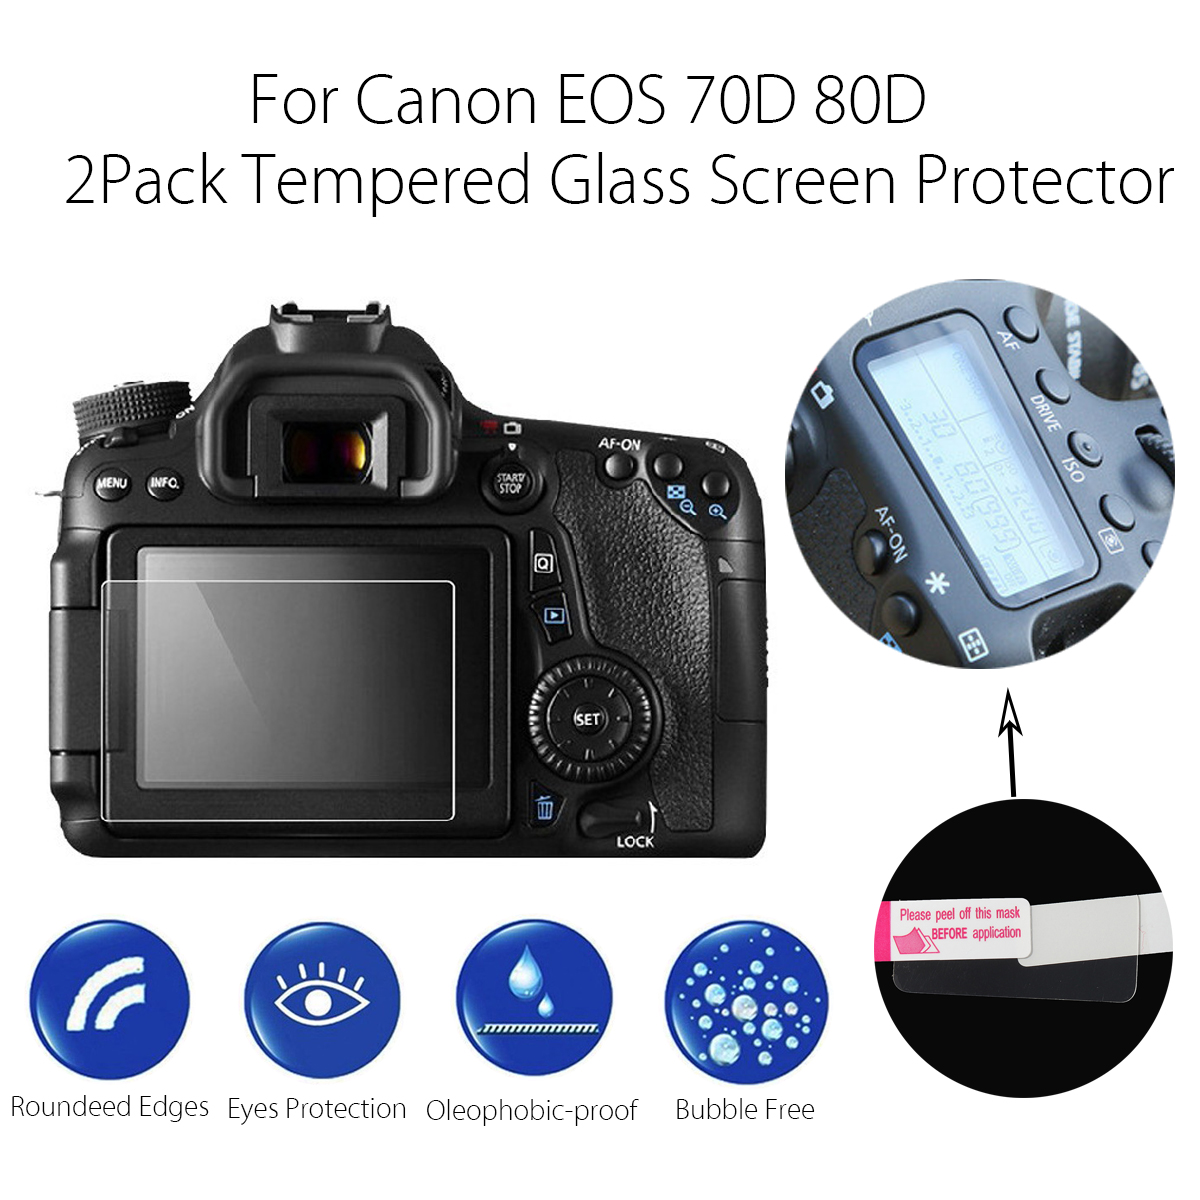 2-Pack-Camera-LCD-Tempered-Glass-Screen-Protector-Guard-For-Canon-EOS-70D-80D-1123293